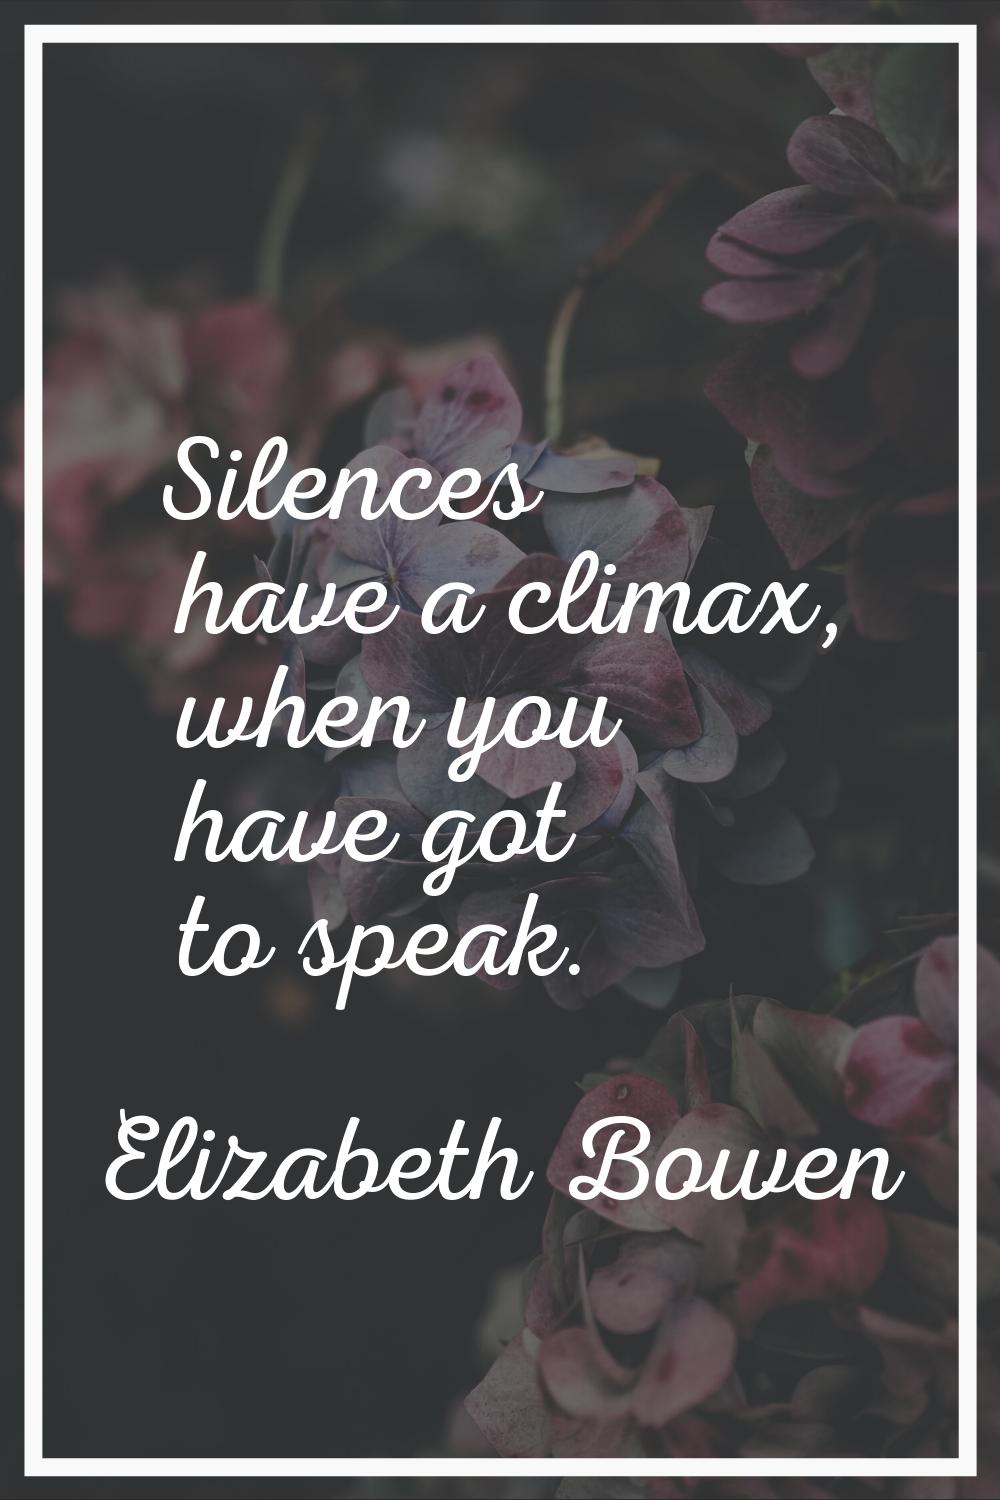 Silences have a climax, when you have got to speak.